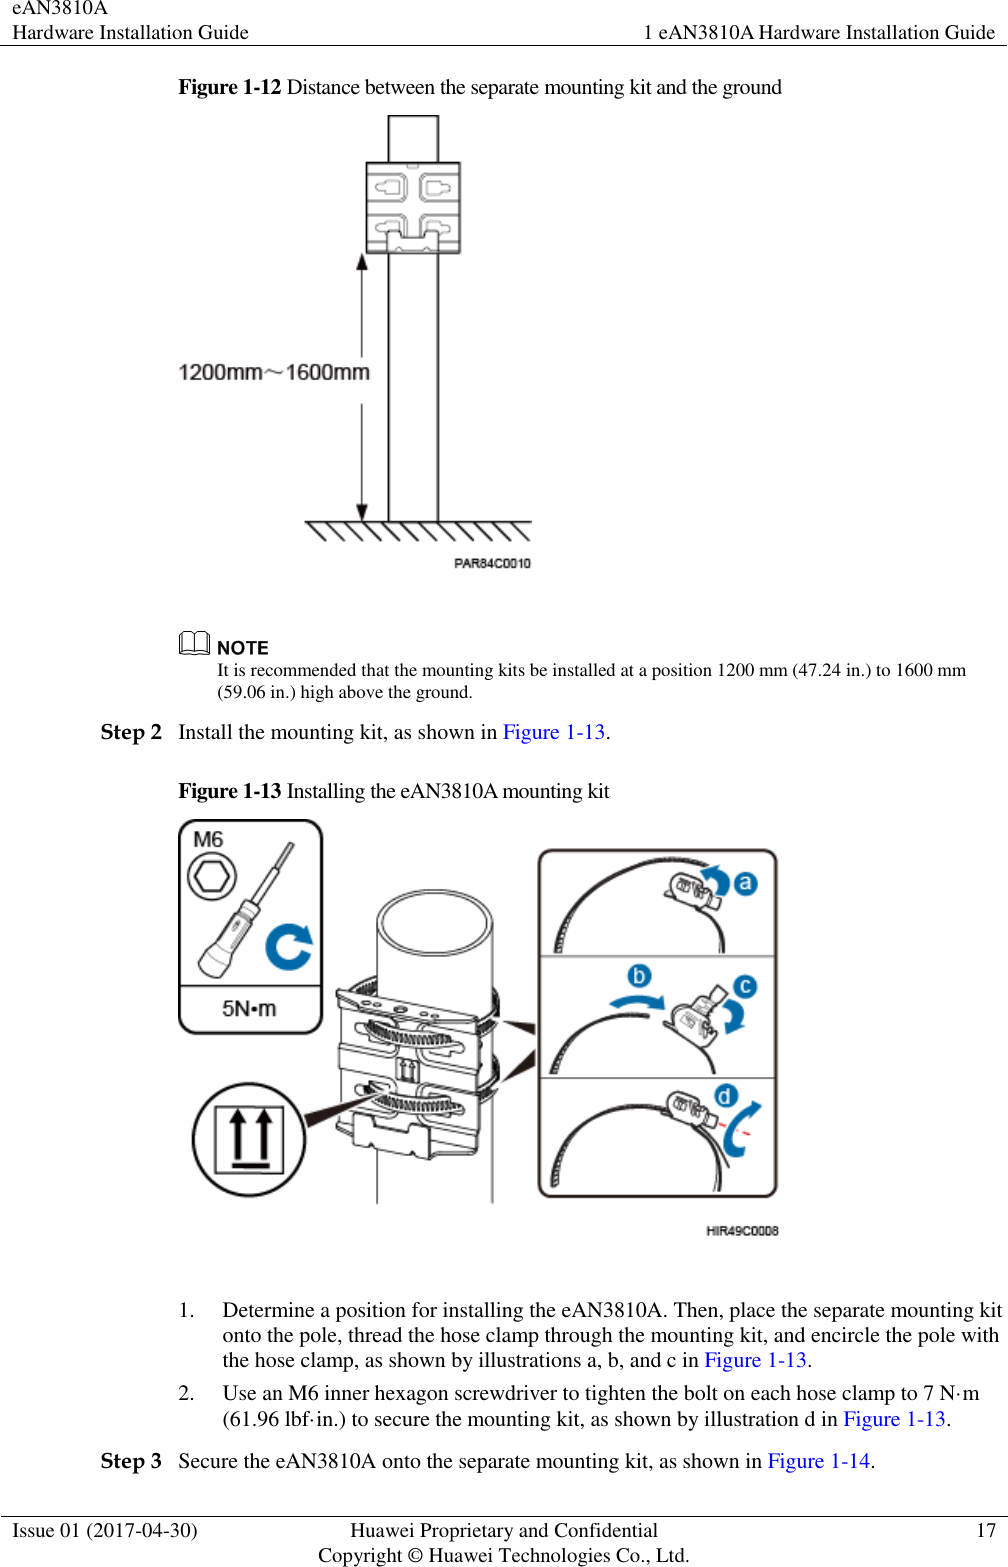 eAN3810A   Hardware Installation Guide 1 eAN3810A Hardware Installation Guide  Issue 01 (2017-04-30) Huawei Proprietary and Confidential                                     Copyright © Huawei Technologies Co., Ltd. 17  Figure 1-12 Distance between the separate mounting kit and the ground    It is recommended that the mounting kits be installed at a position 1200 mm (47.24 in.) to 1600 mm (59.06 in.) high above the ground.   Step 2 Install the mounting kit, as shown in Figure 1-13. Figure 1-13 Installing the eAN3810A mounting kit   1. Determine a position for installing the eAN3810A. Then, place the separate mounting kit onto the pole, thread the hose clamp through the mounting kit, and encircle the pole with the hose clamp, as shown by illustrations a, b, and c in Figure 1-13. 2. Use an M6 inner hexagon screwdriver to tighten the bolt on each hose clamp to 7 N·m (61.96 lbf·in.) to secure the mounting kit, as shown by illustration d in Figure 1-13. Step 3 Secure the eAN3810A onto the separate mounting kit, as shown in Figure 1-14. 